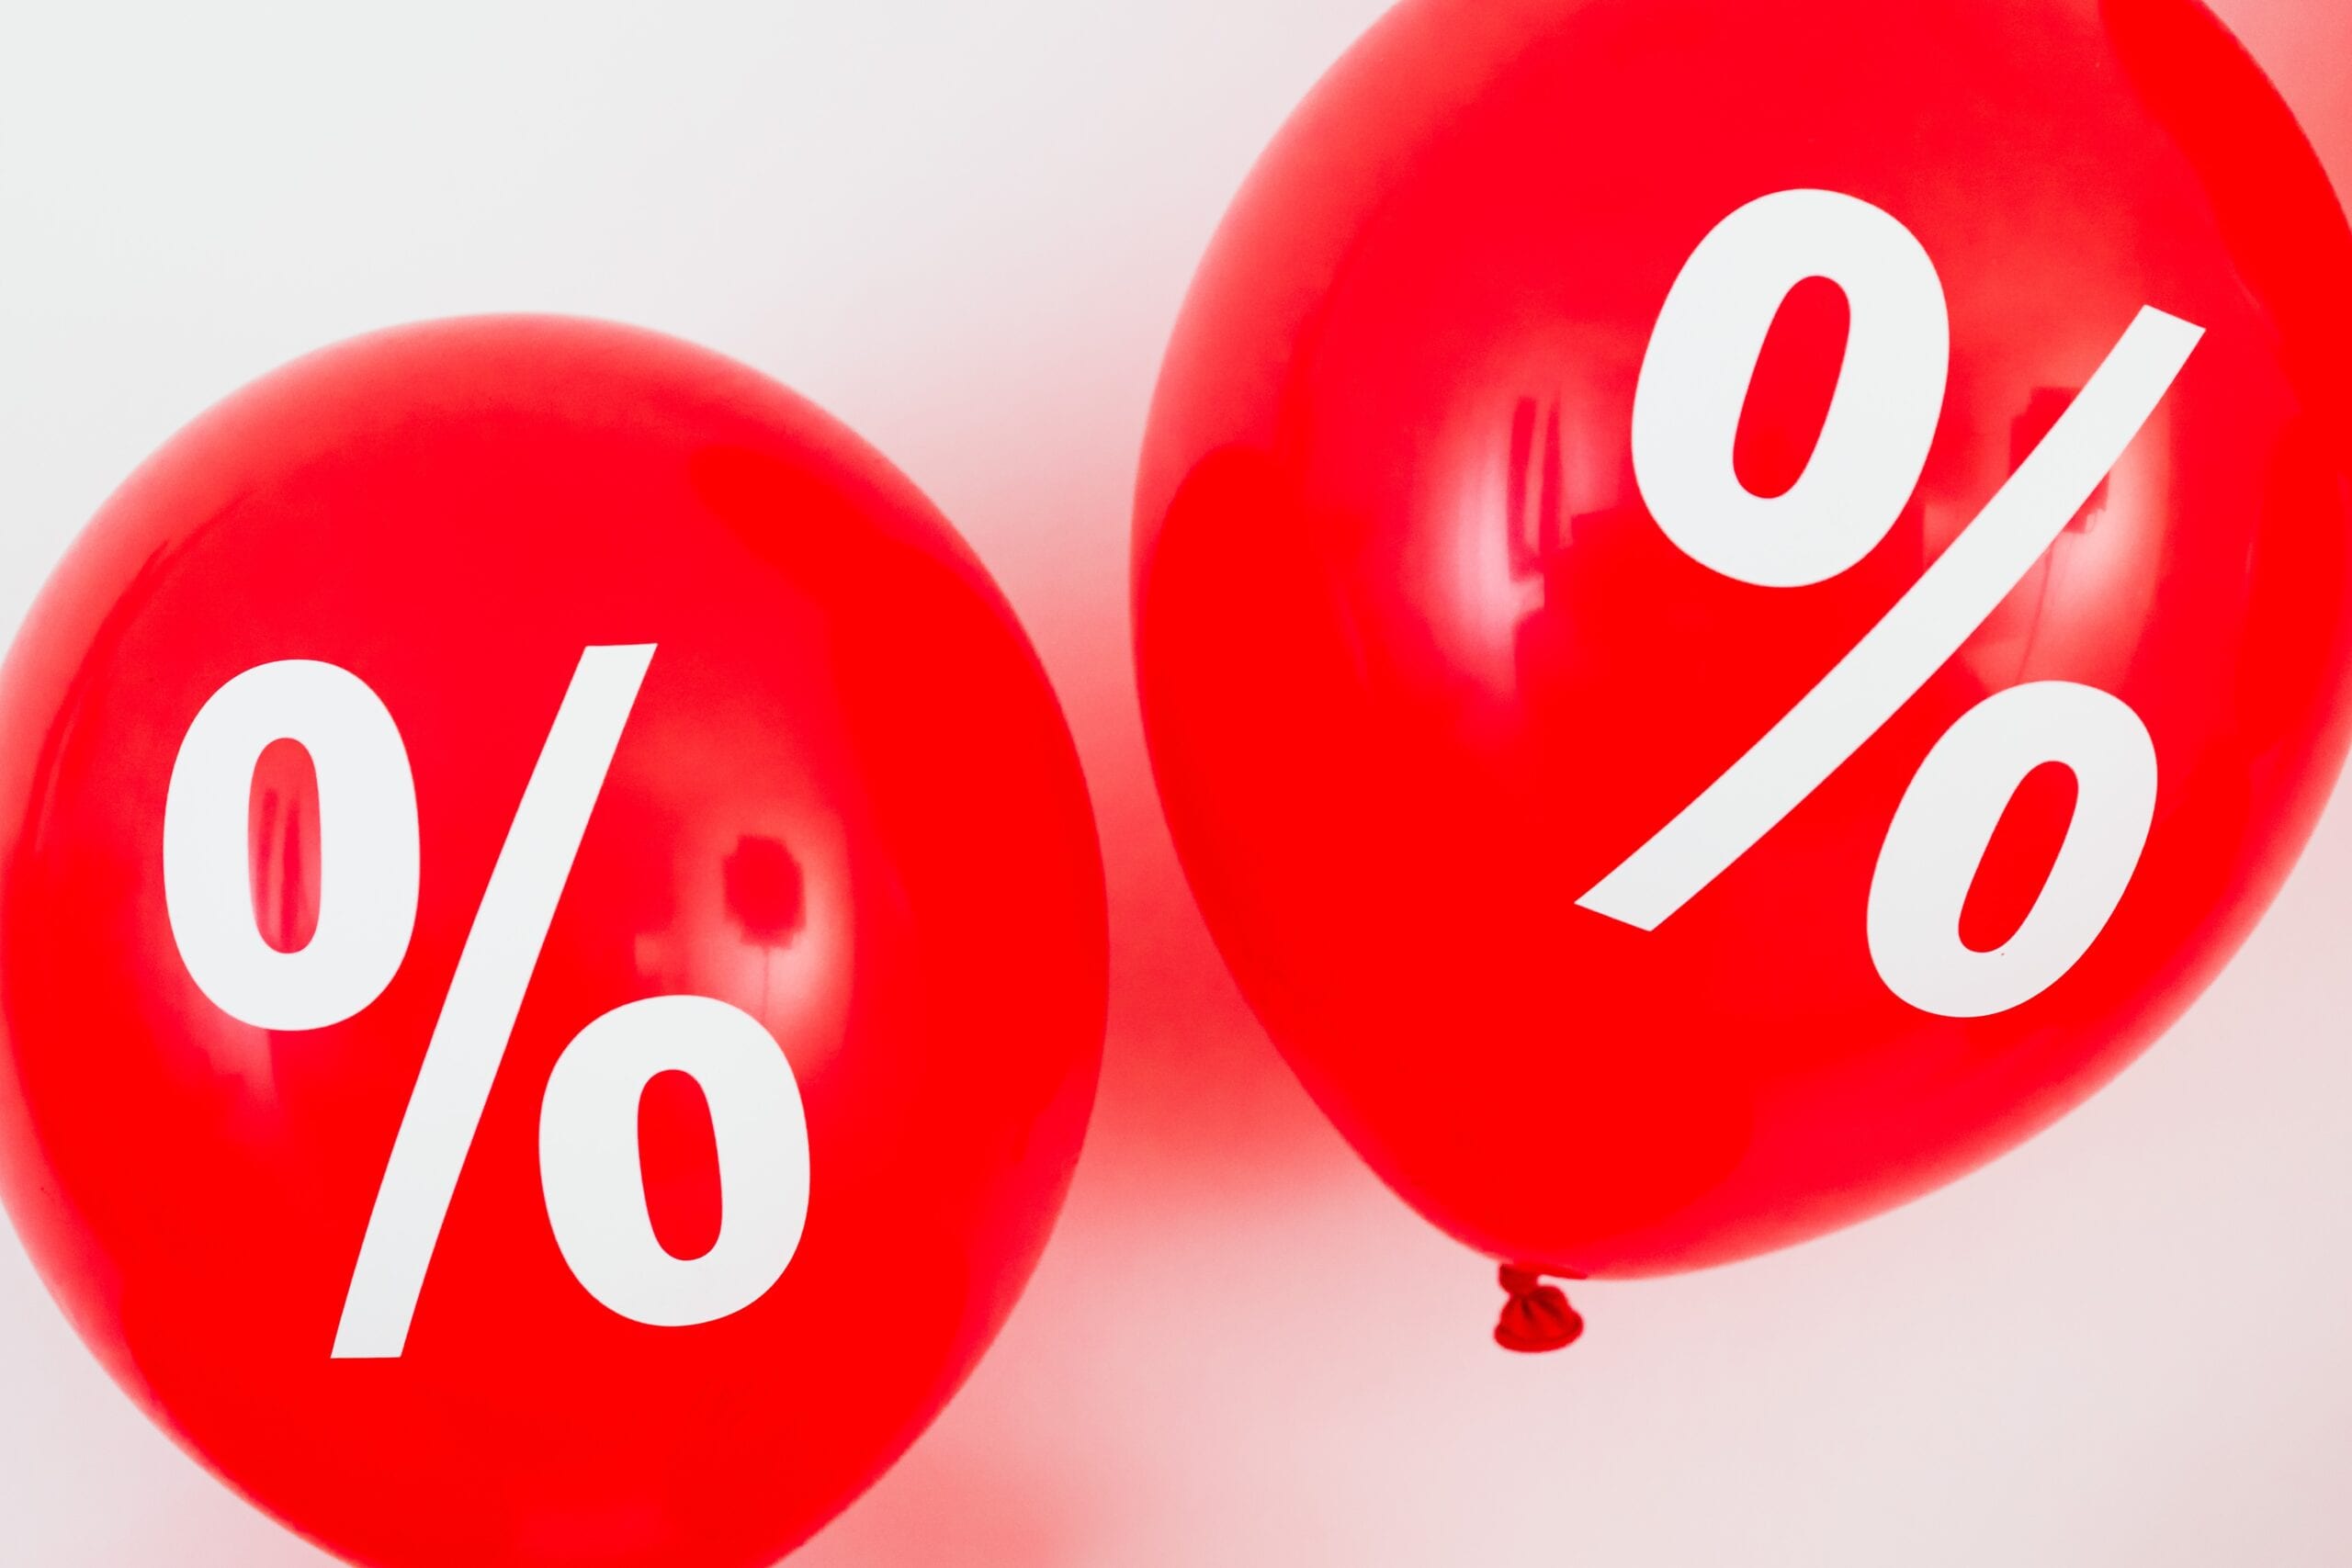 Red balloons with percentage signs